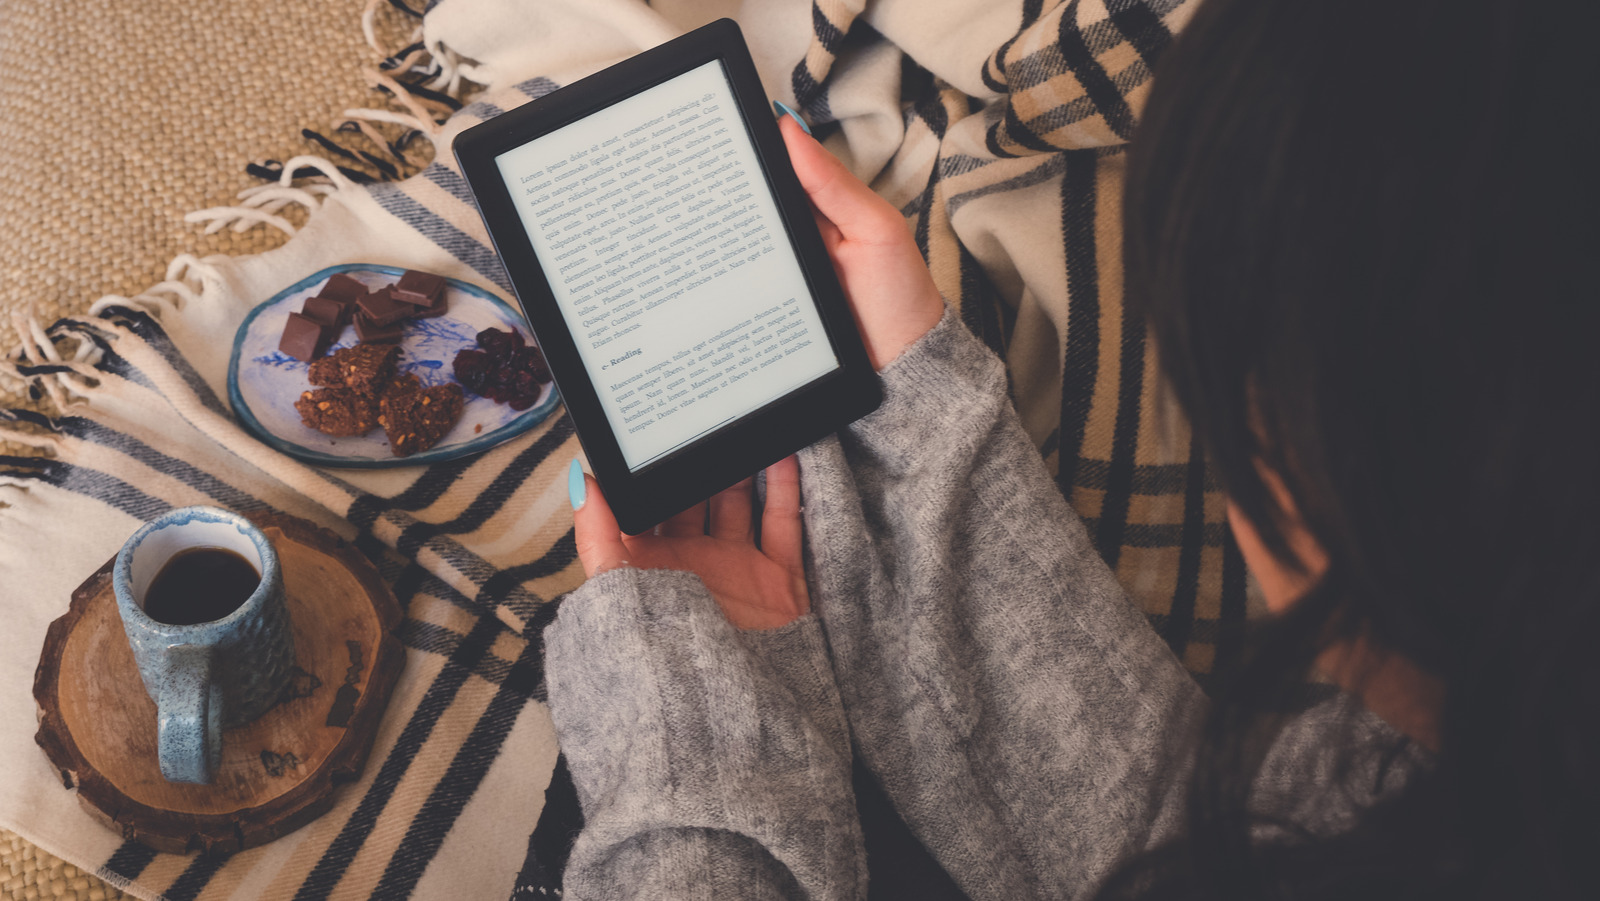 Books We Hope To Grab During 2023's Final Stuff Your Kindle Day, Per